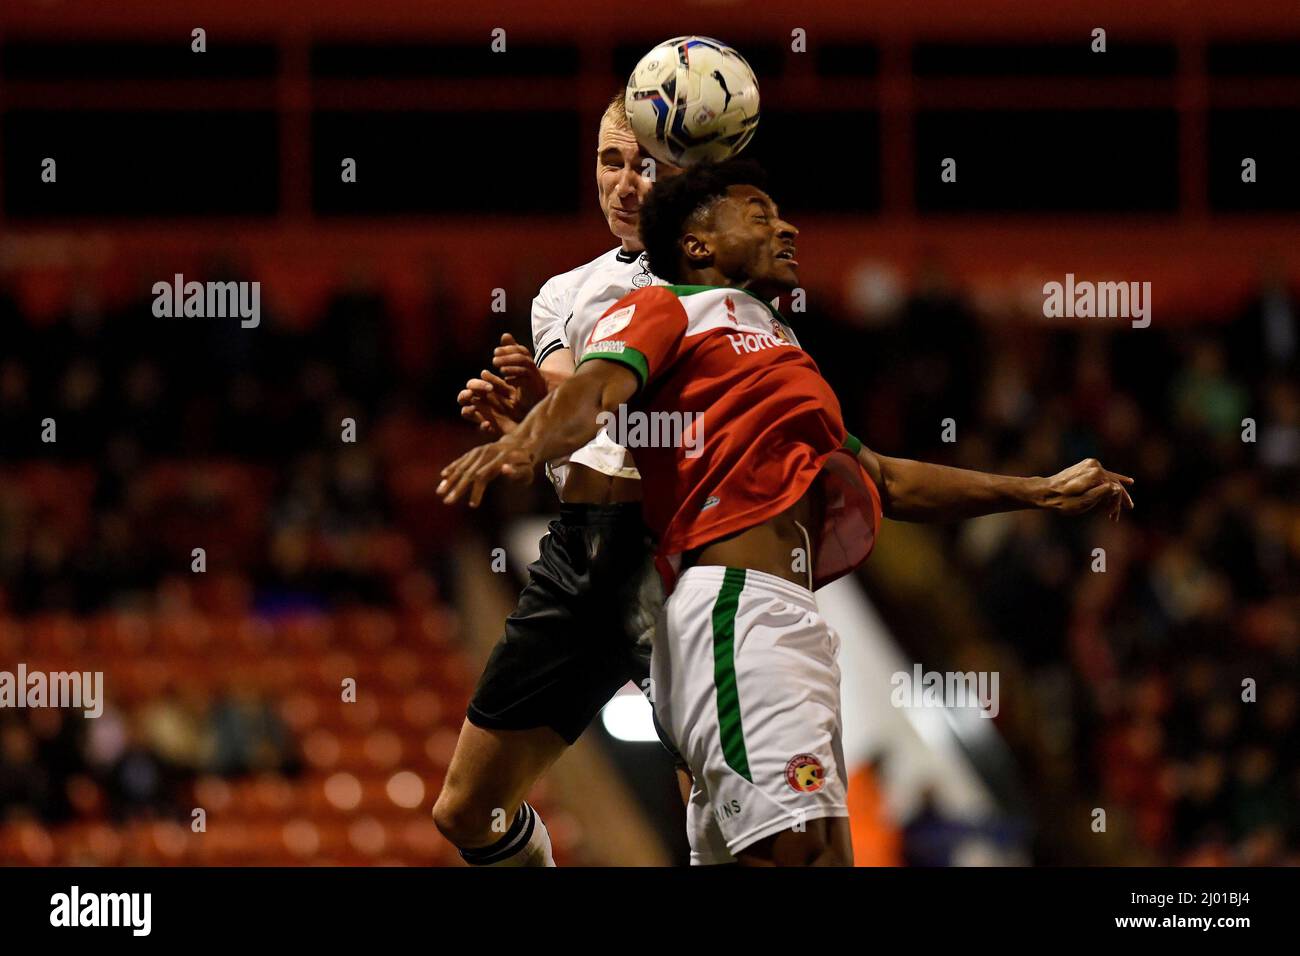 WALSALL, UK. MAR 15TH Oldham Athletic's Will Sutton tussles with Tyrese Shade of Walsall Football Club during the Sky Bet League 2 match between Walsall and Oldham Athletic at the Banks's Stadium, Walsall on Tuesday 15th March 2022. (Credit: Eddie Garvey | MI News) Credit: MI News & Sport /Alamy Live News Stock Photo